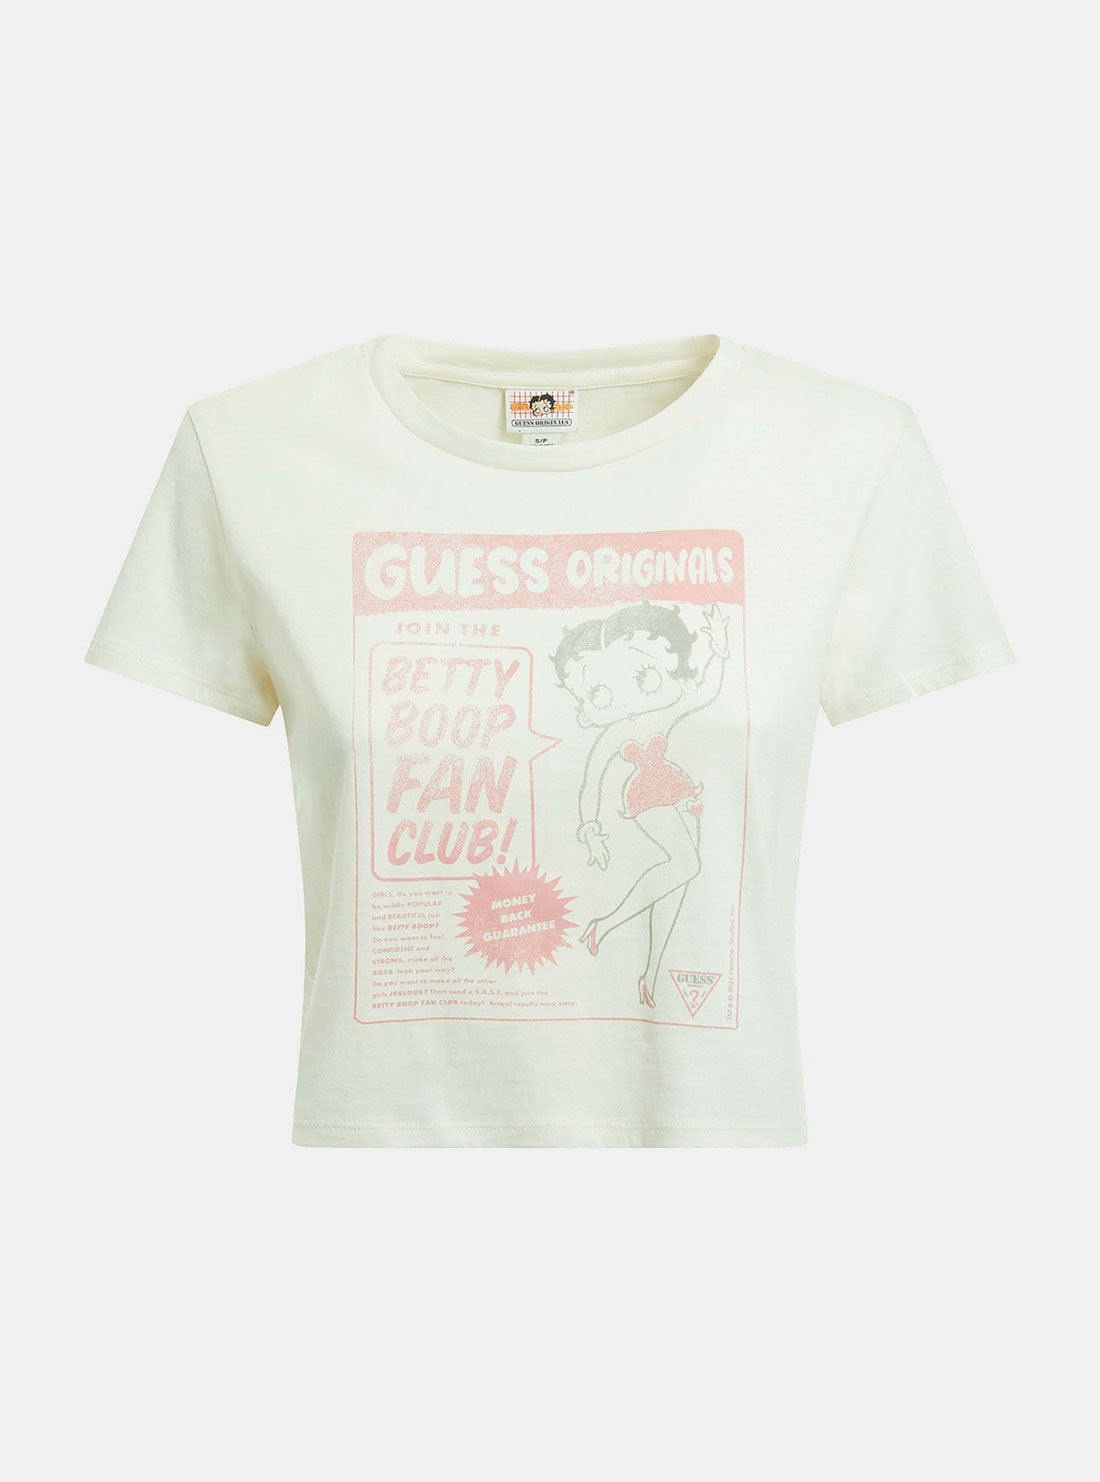 GUESS Women's Guess Originals x Betty Boop White Cropped Baby T-Shirt W2BP08K9RM3 Ghost View